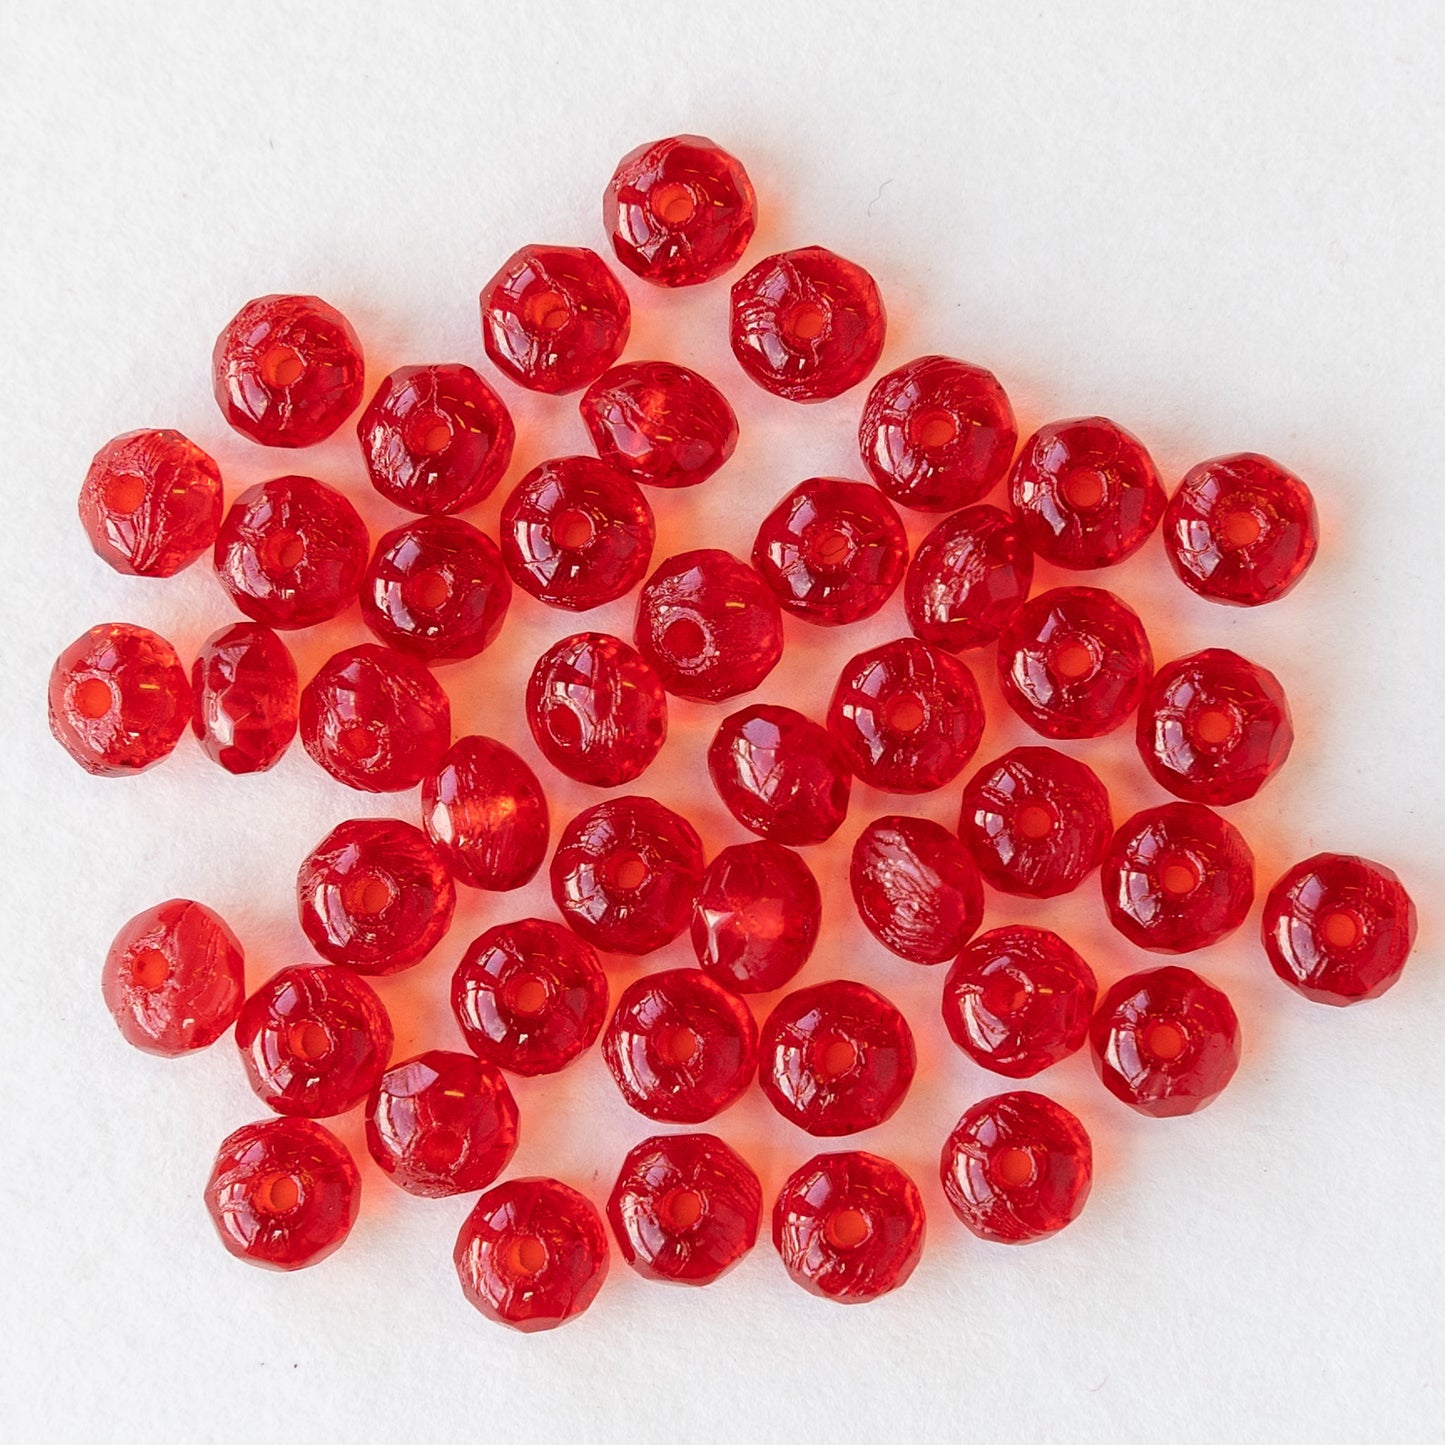 Load image into Gallery viewer, 3x5mm Firepolished Rondelles - Red - 100 Beads
